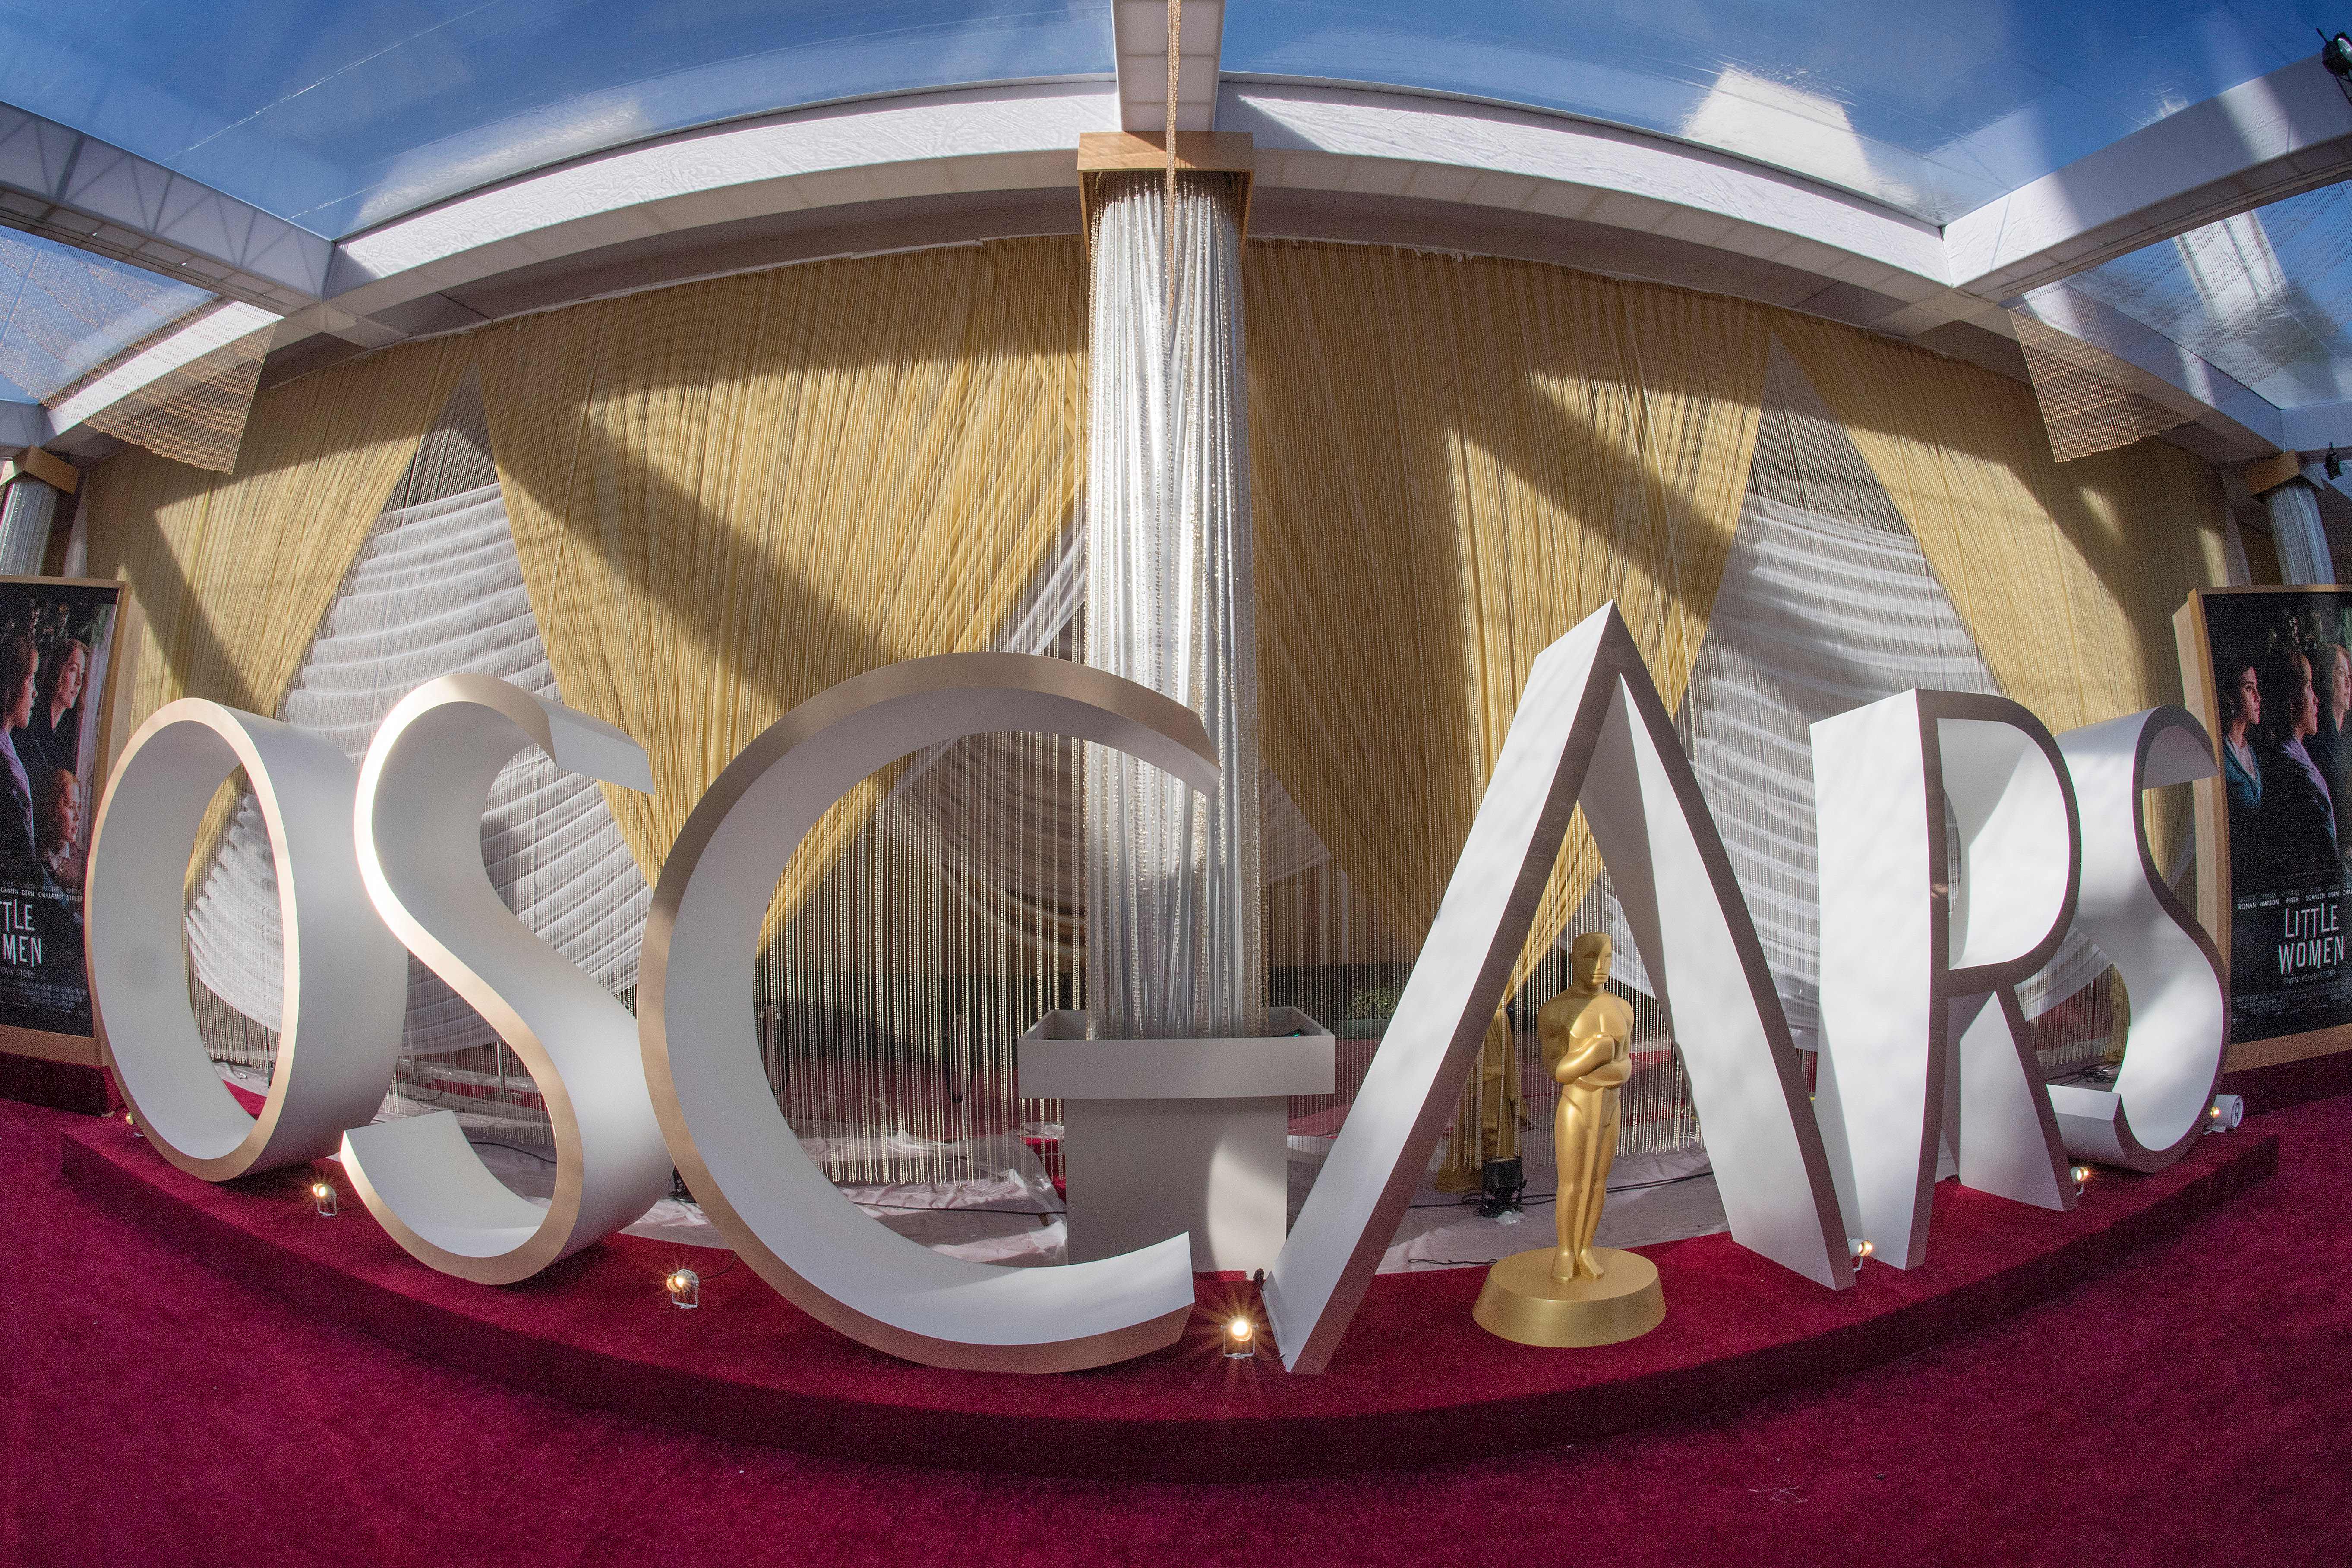 An Oscars sign and statue are displayed on the red carpet area